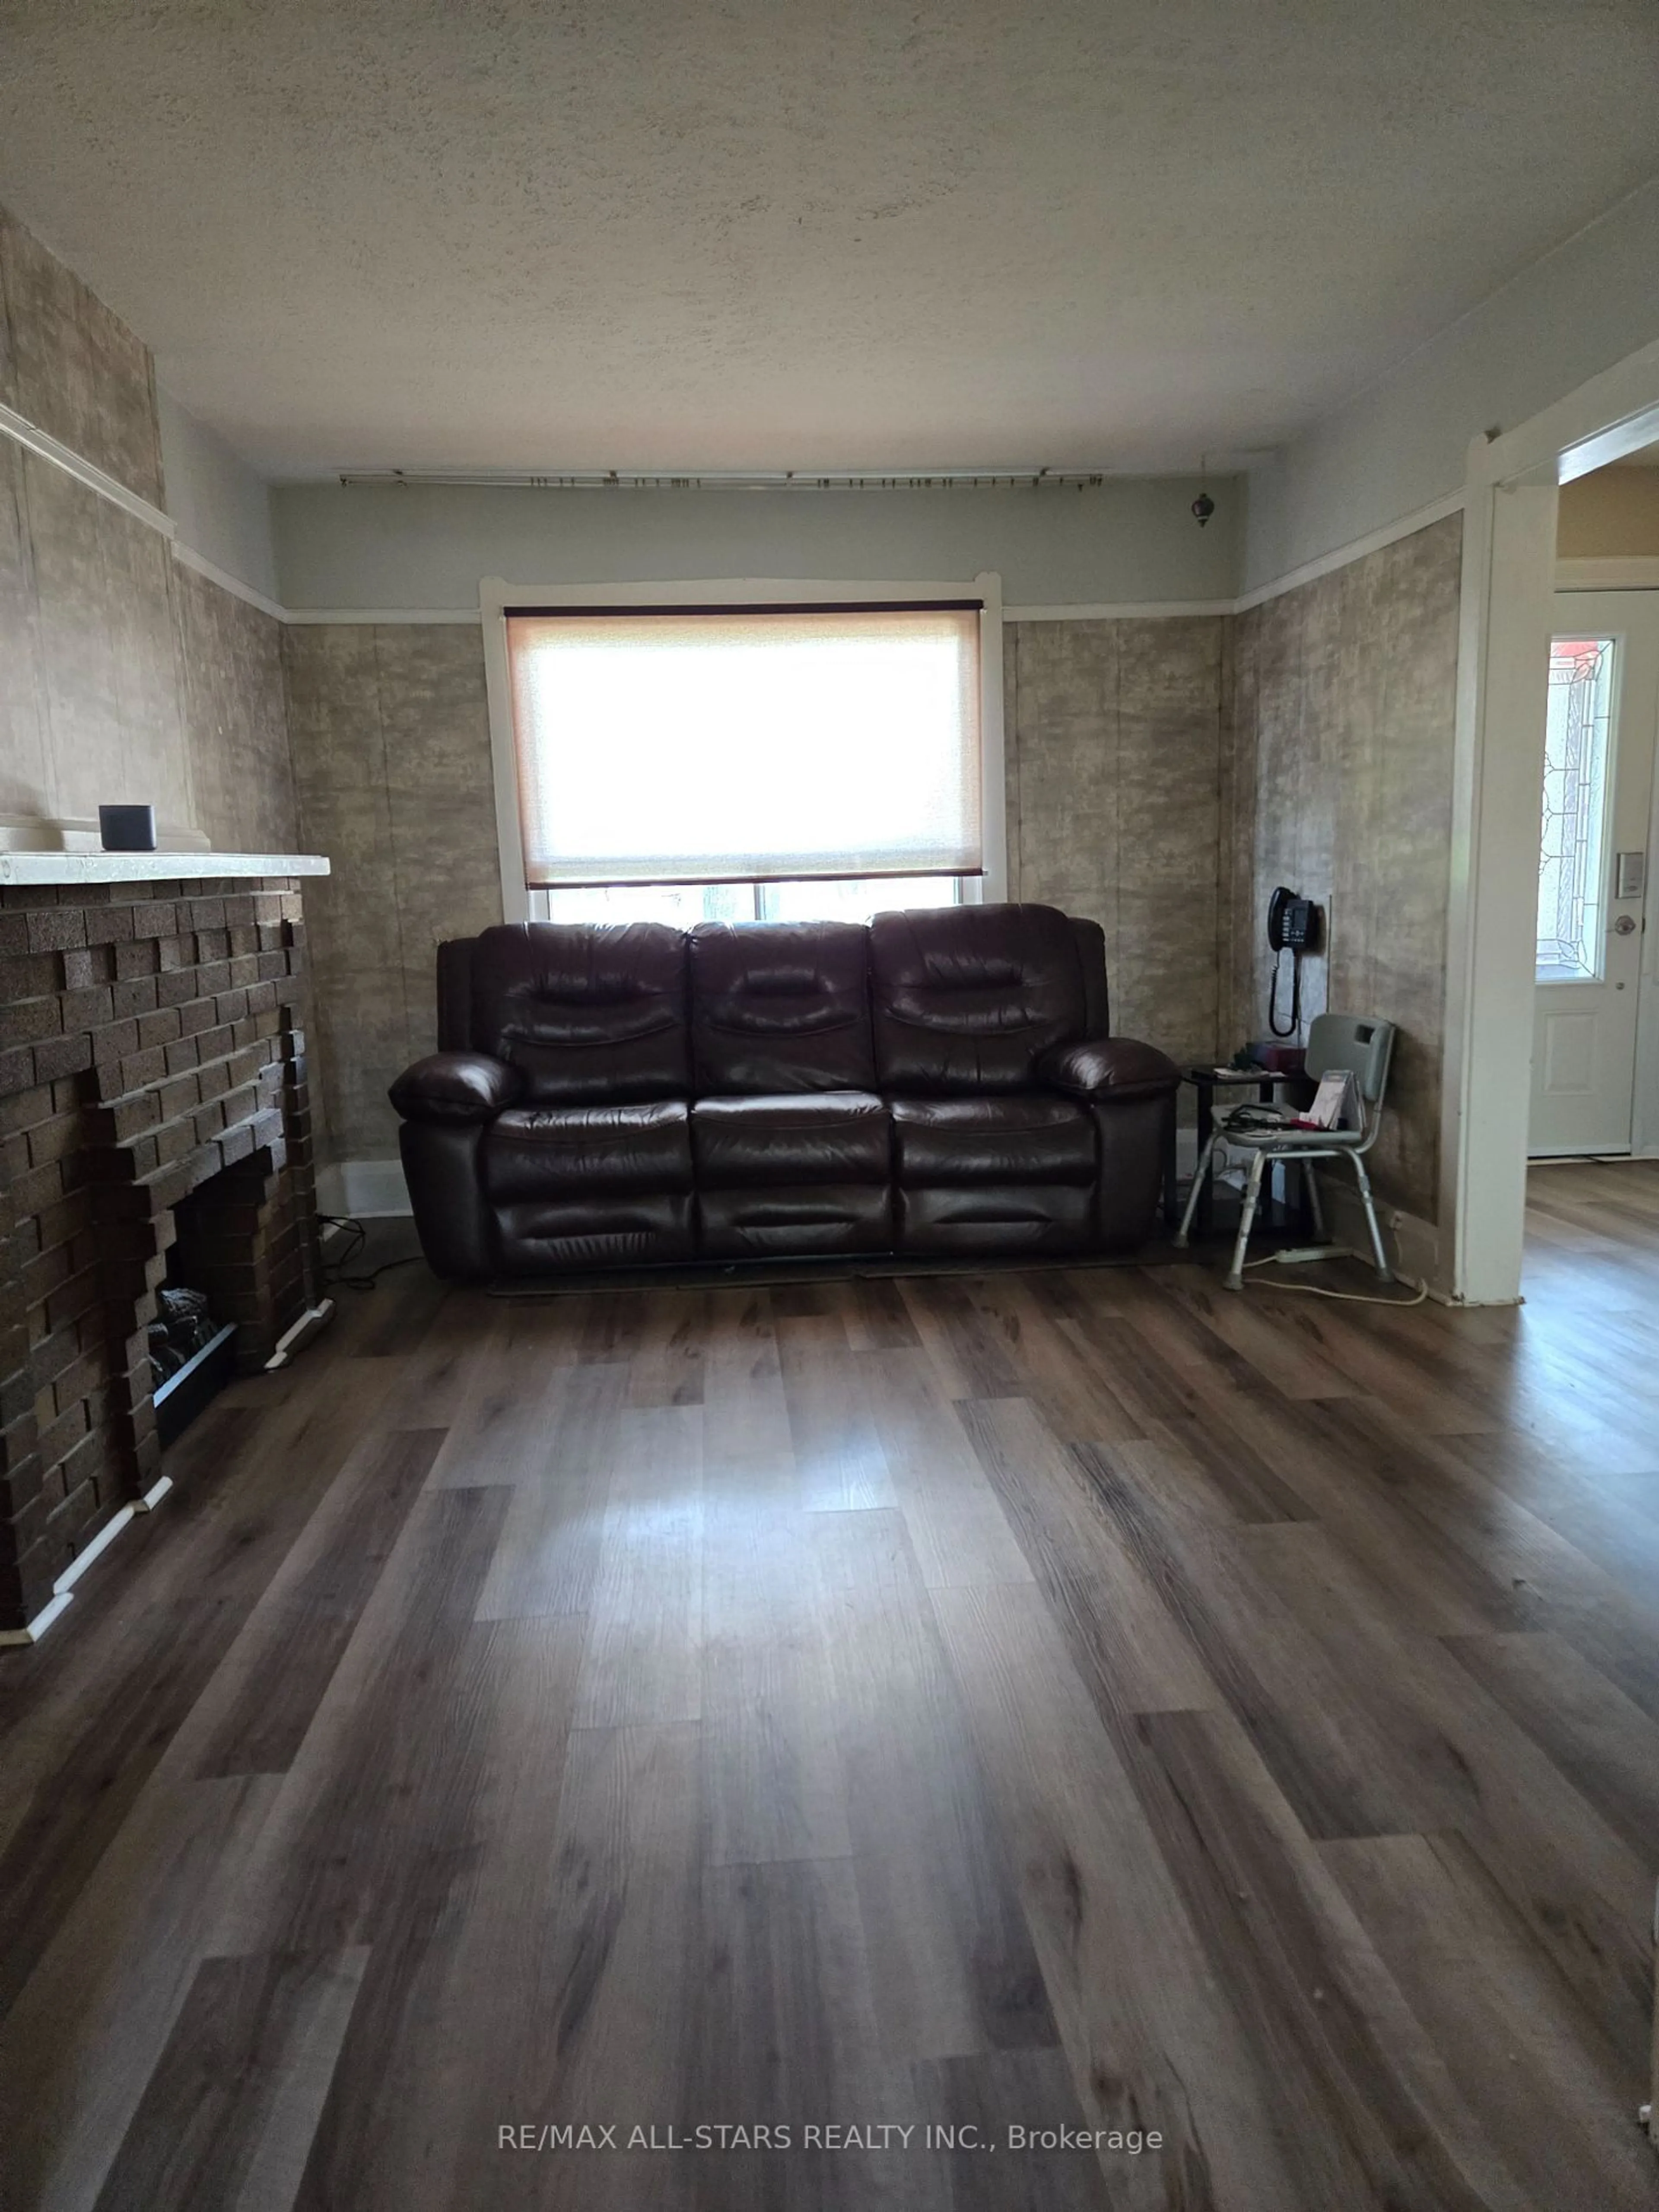 A pic of a room for 217 Golfview Ave, Toronto Ontario M4E 2K8